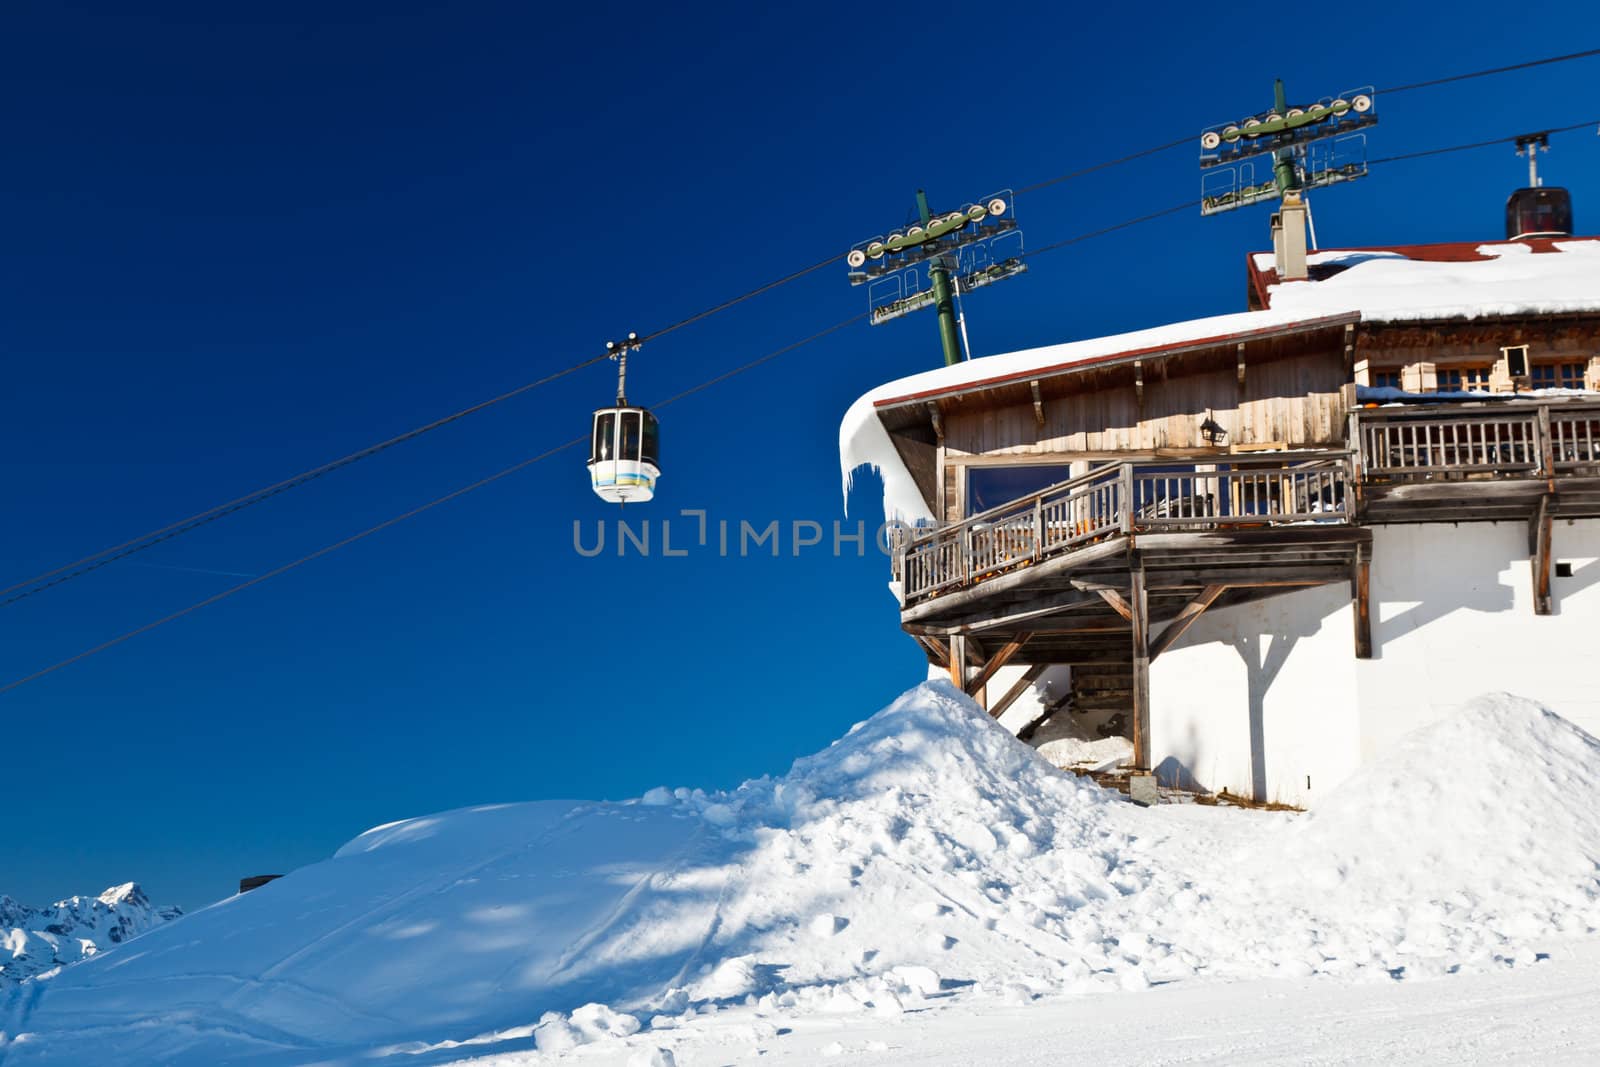 Upper Cable Lift Station and Gondola in French Alps